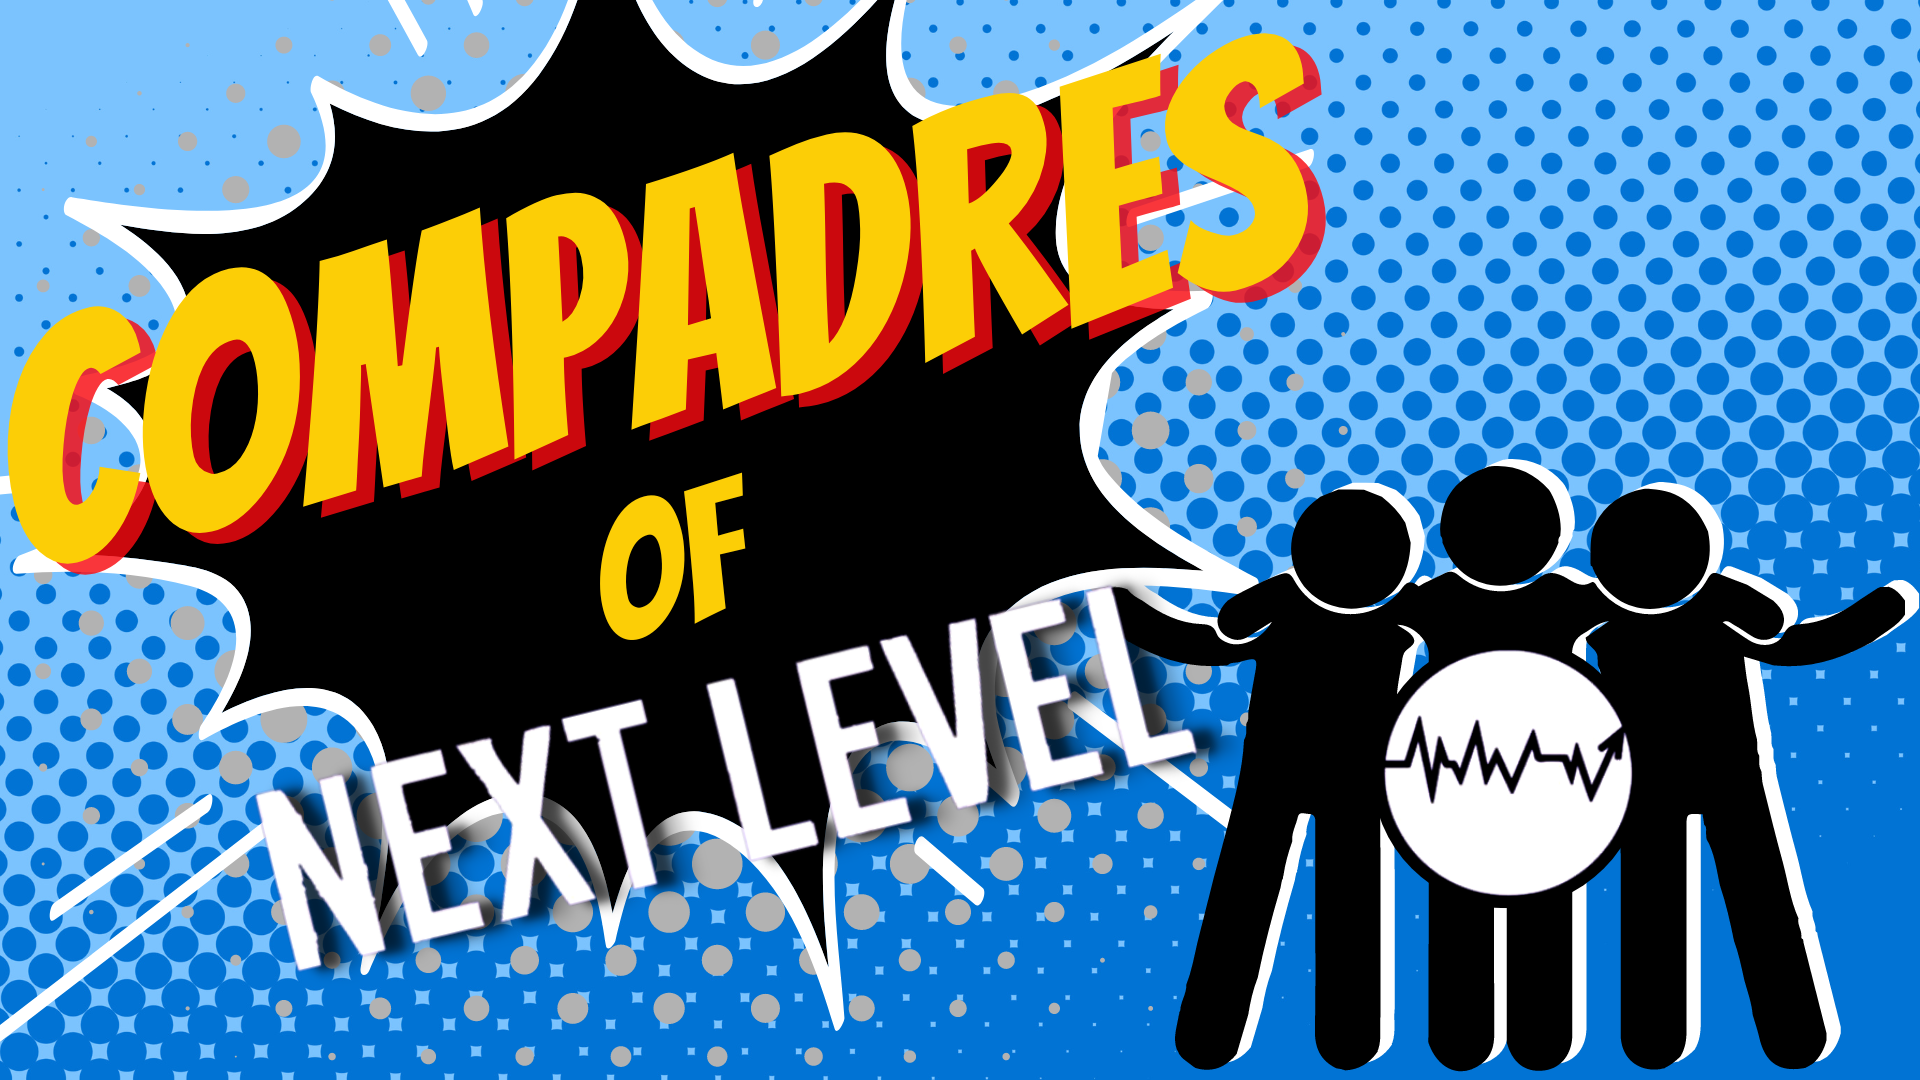 Compadres of Next Level, Week 1